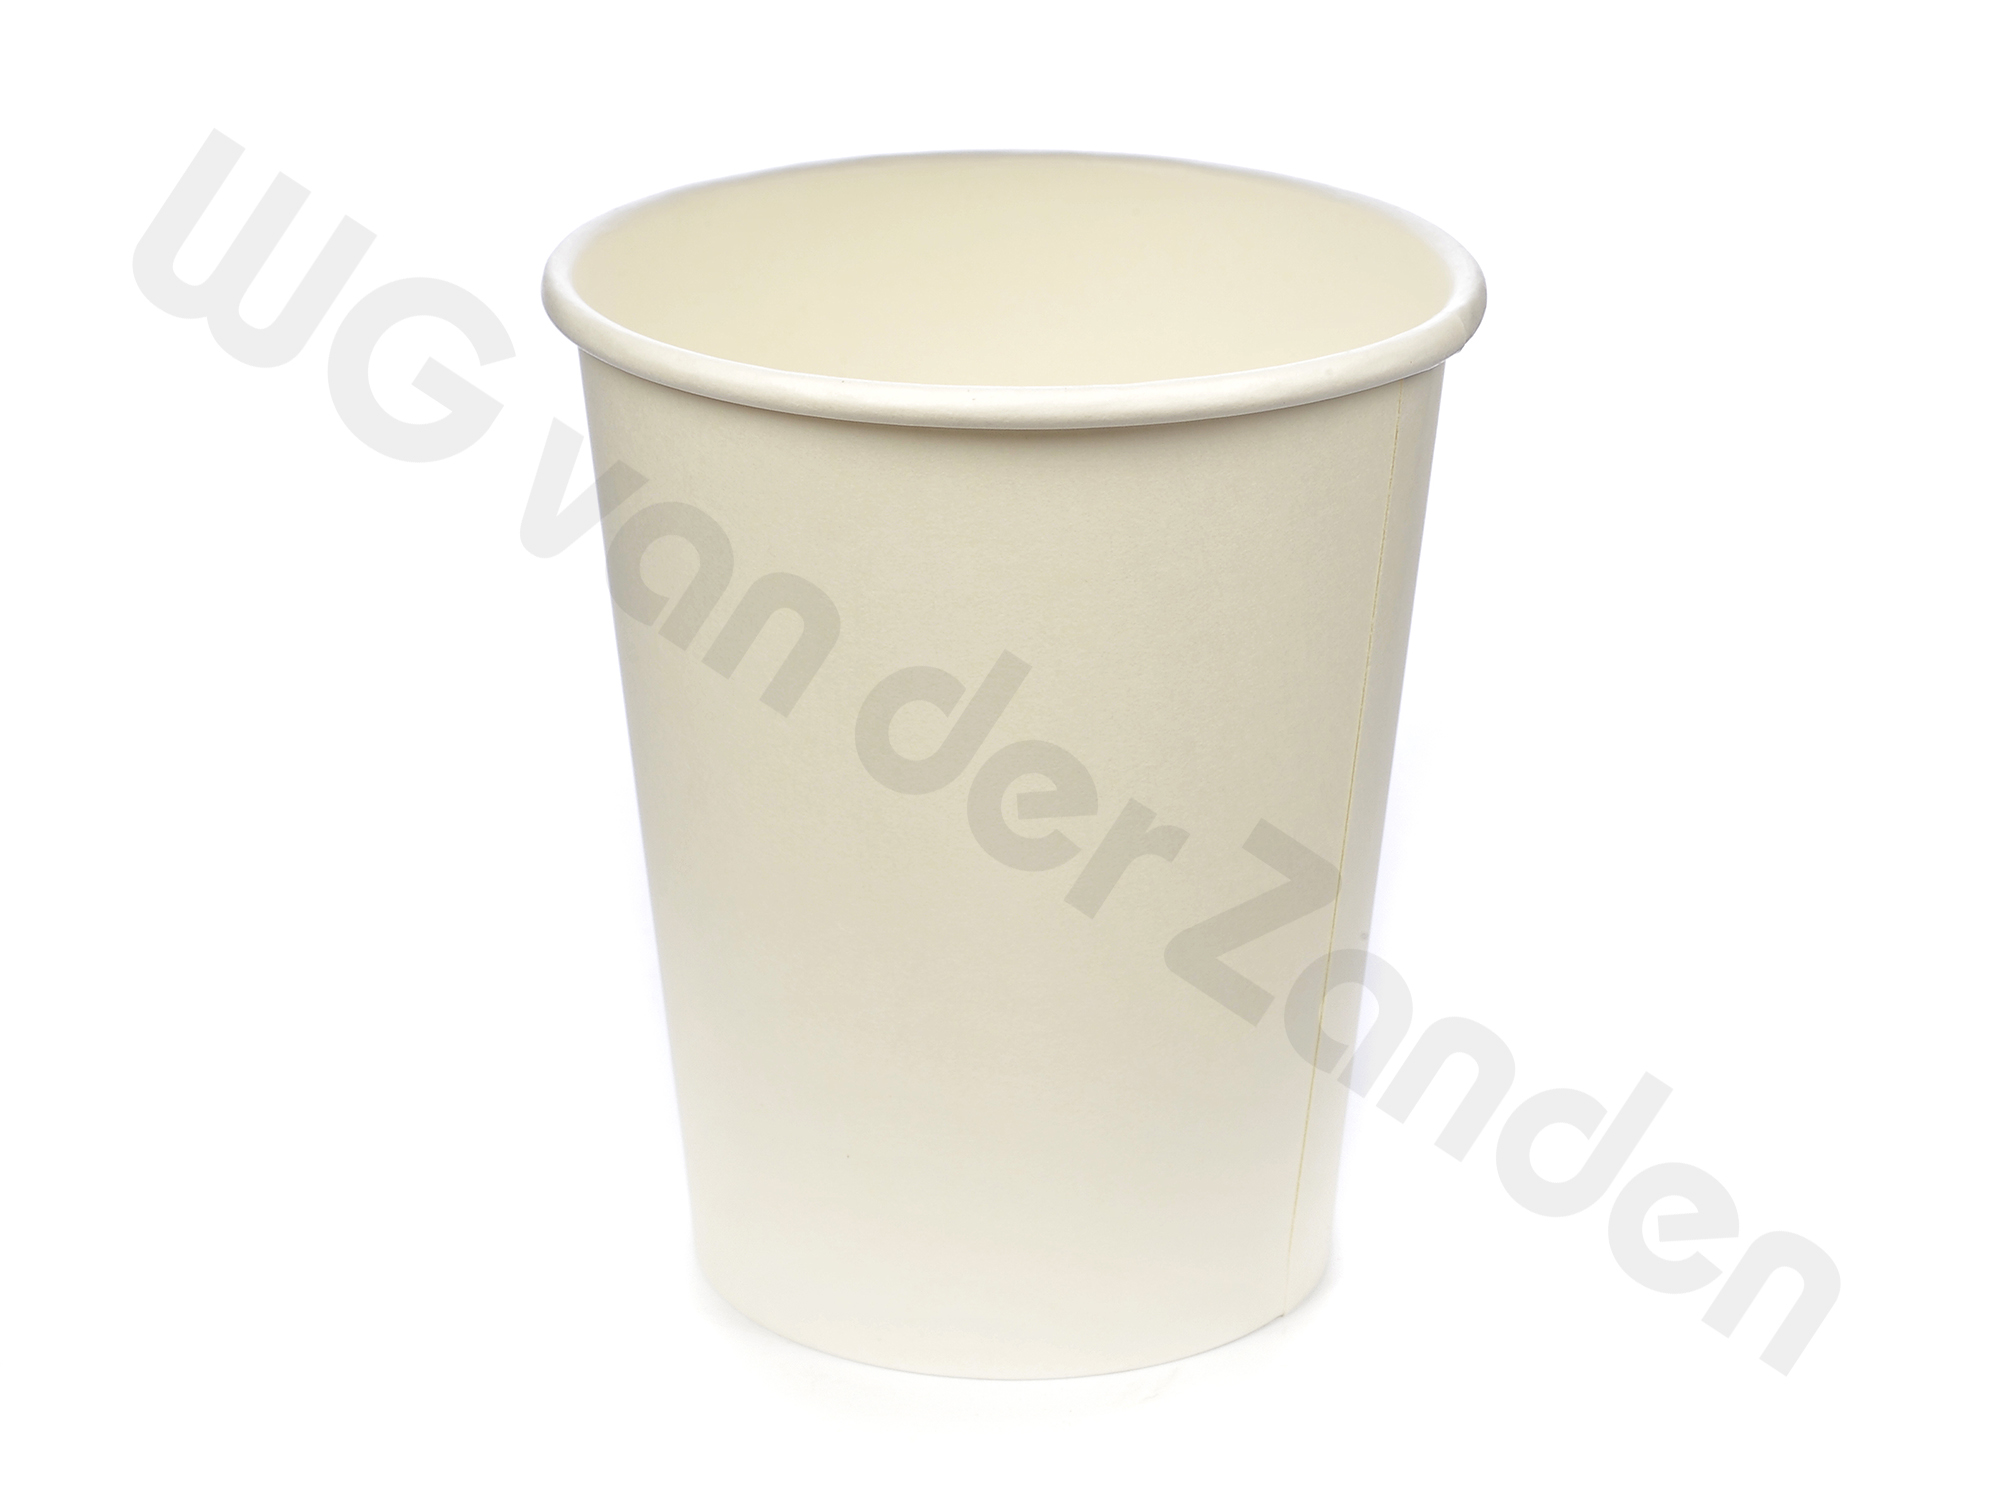 130085 CUPS DISPOSABLE PAPER COFFEE TO GO 8OZ